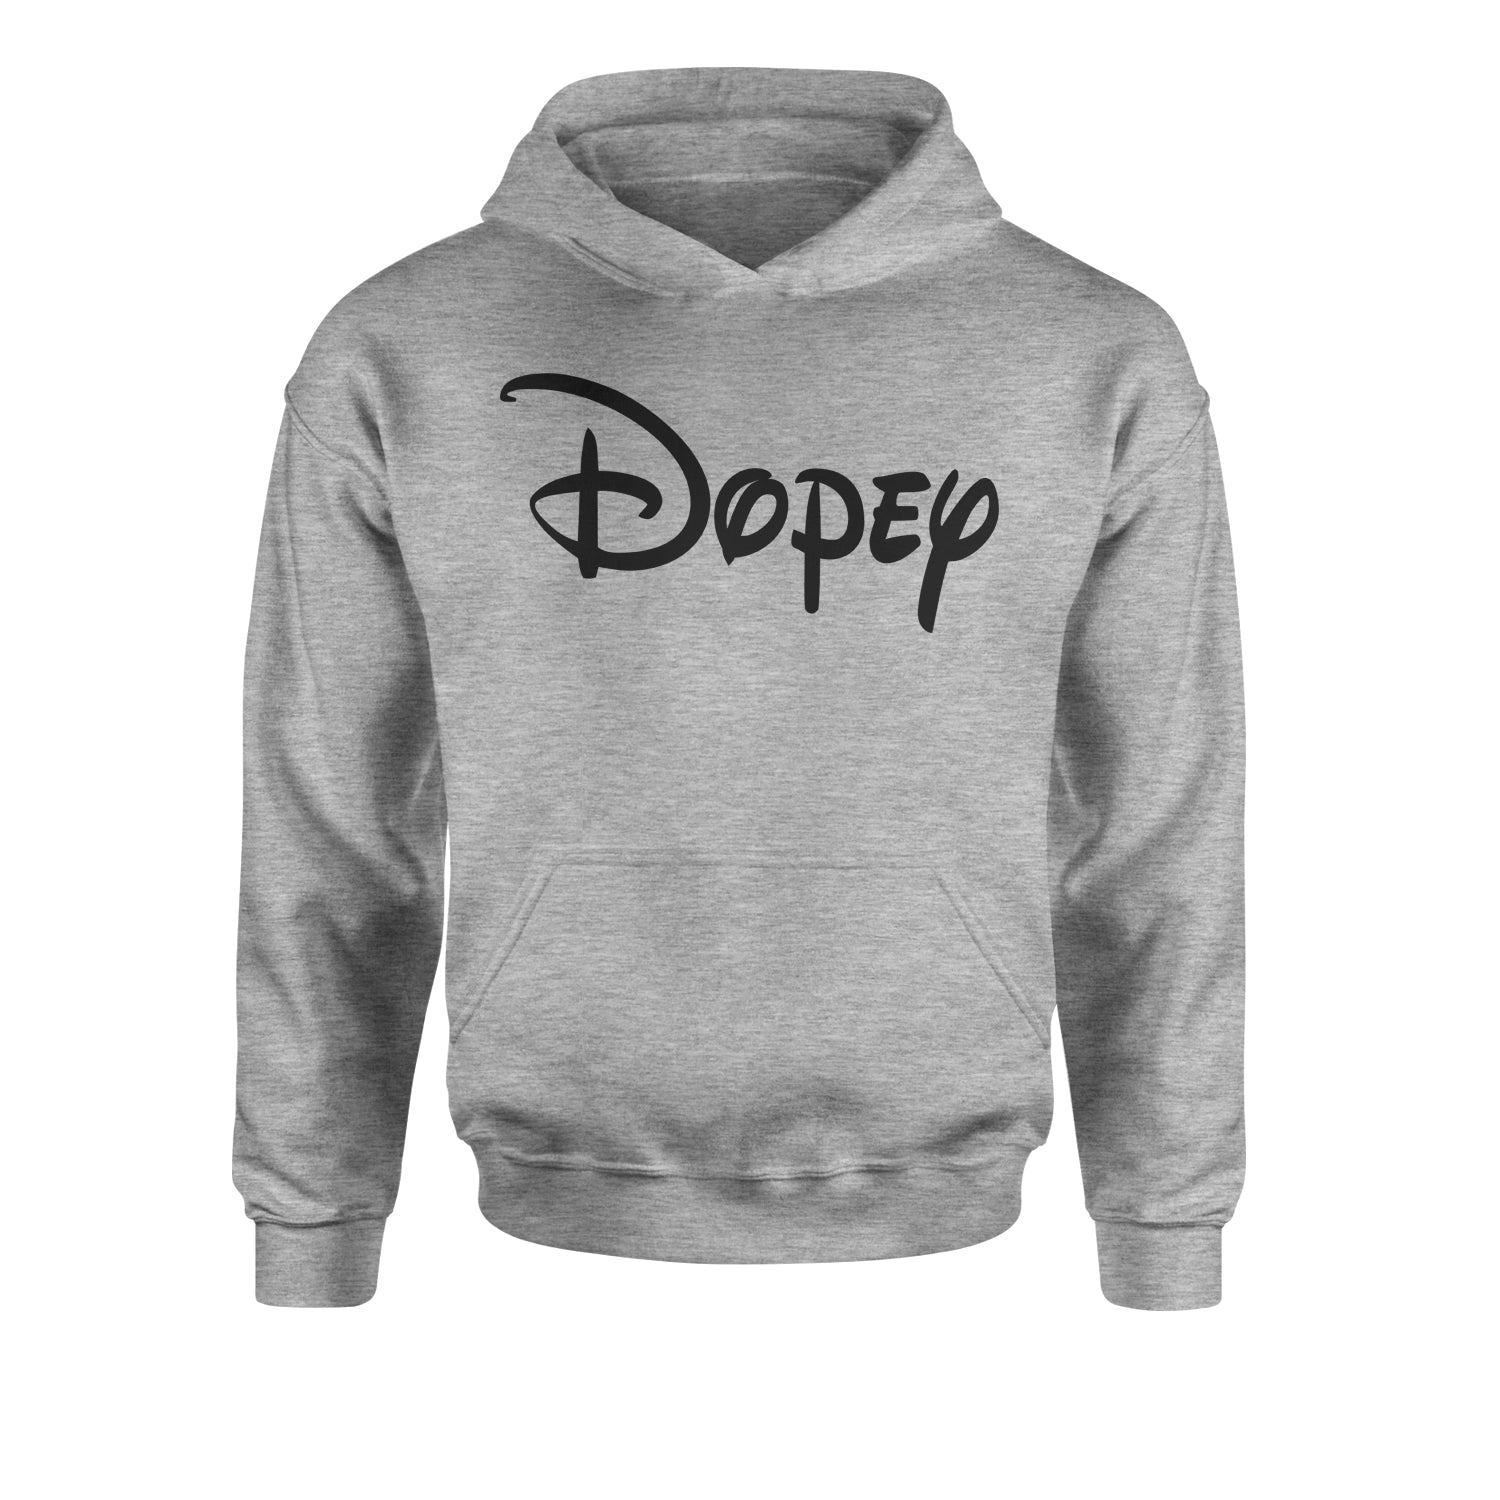 Dopey - 7 Dwarfs Costume Youth-Sized Hoodie and, costume, dwarfs, group, halloween, matching, seven, snow, the, white by Expression Tees